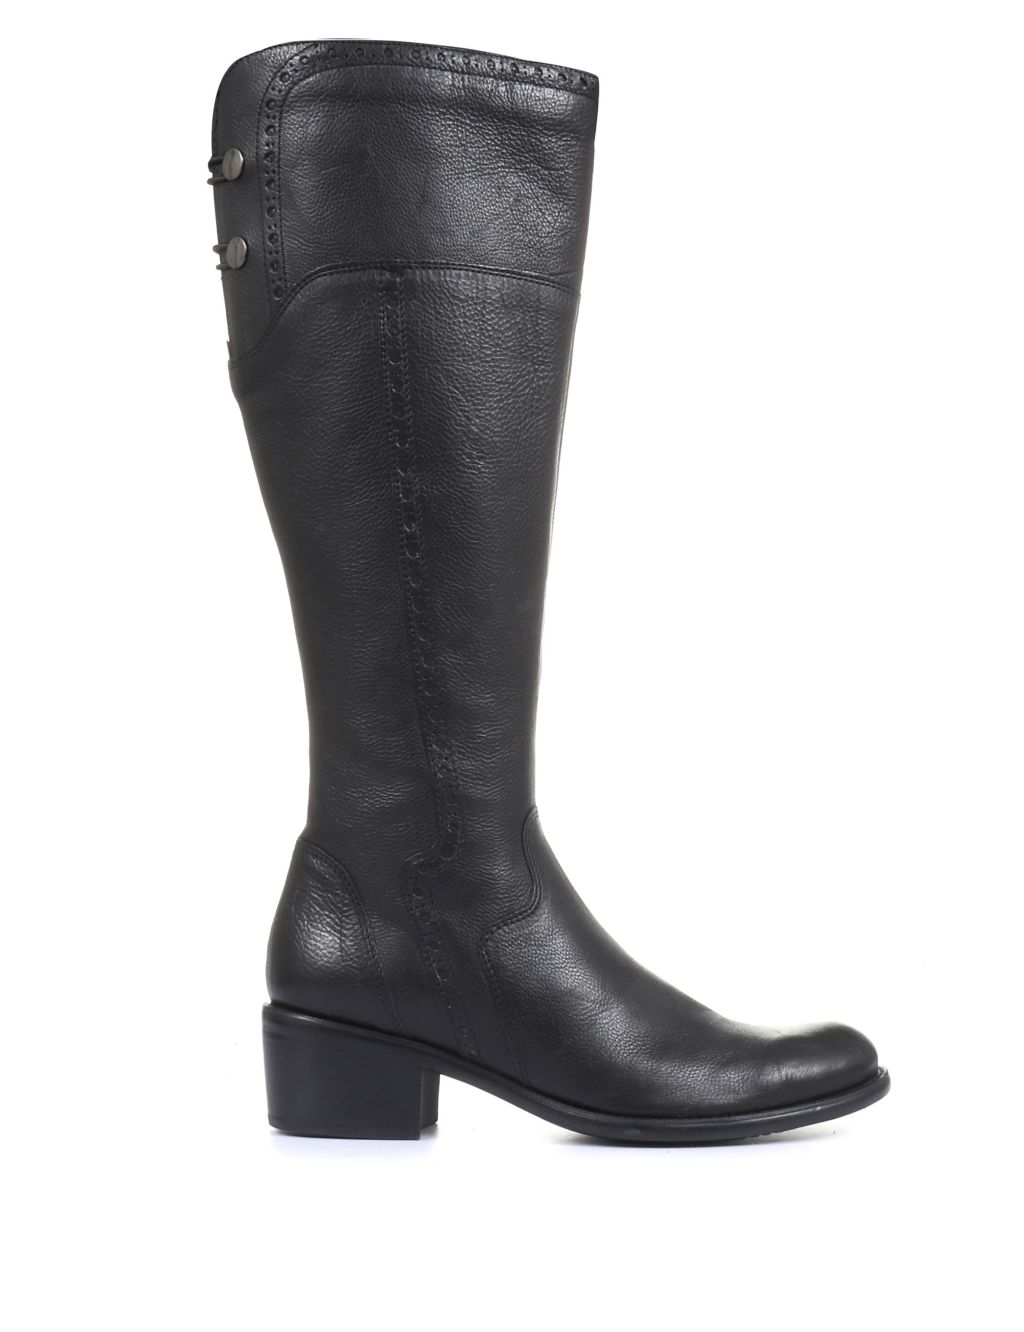 Leather Knee High Boots image 1